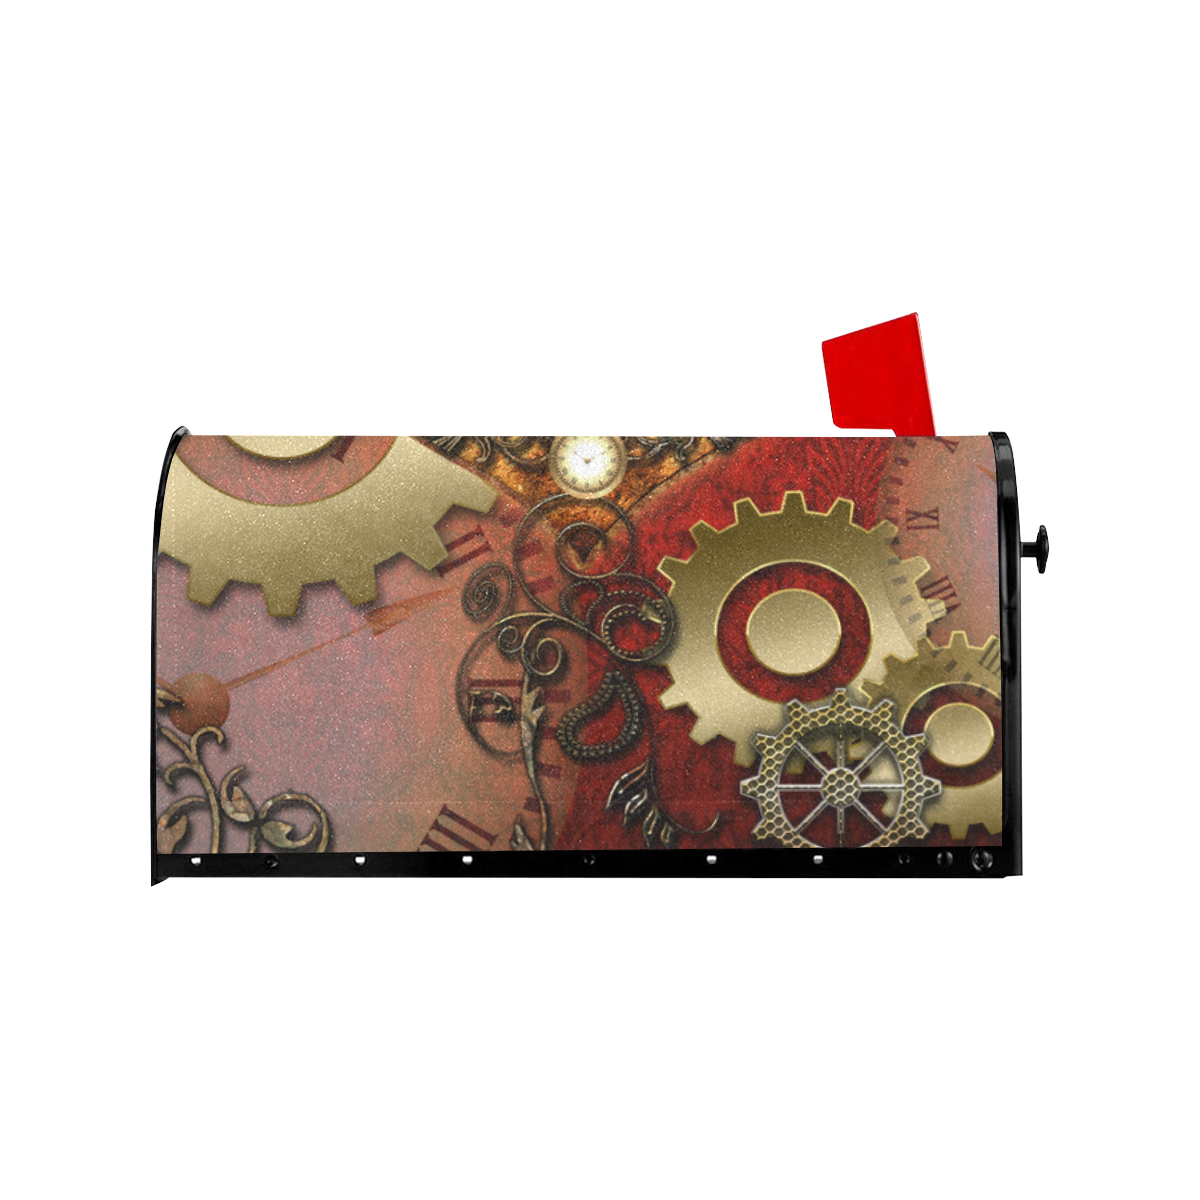 Steampunk, awesome glowing hearts Mailbox Cover